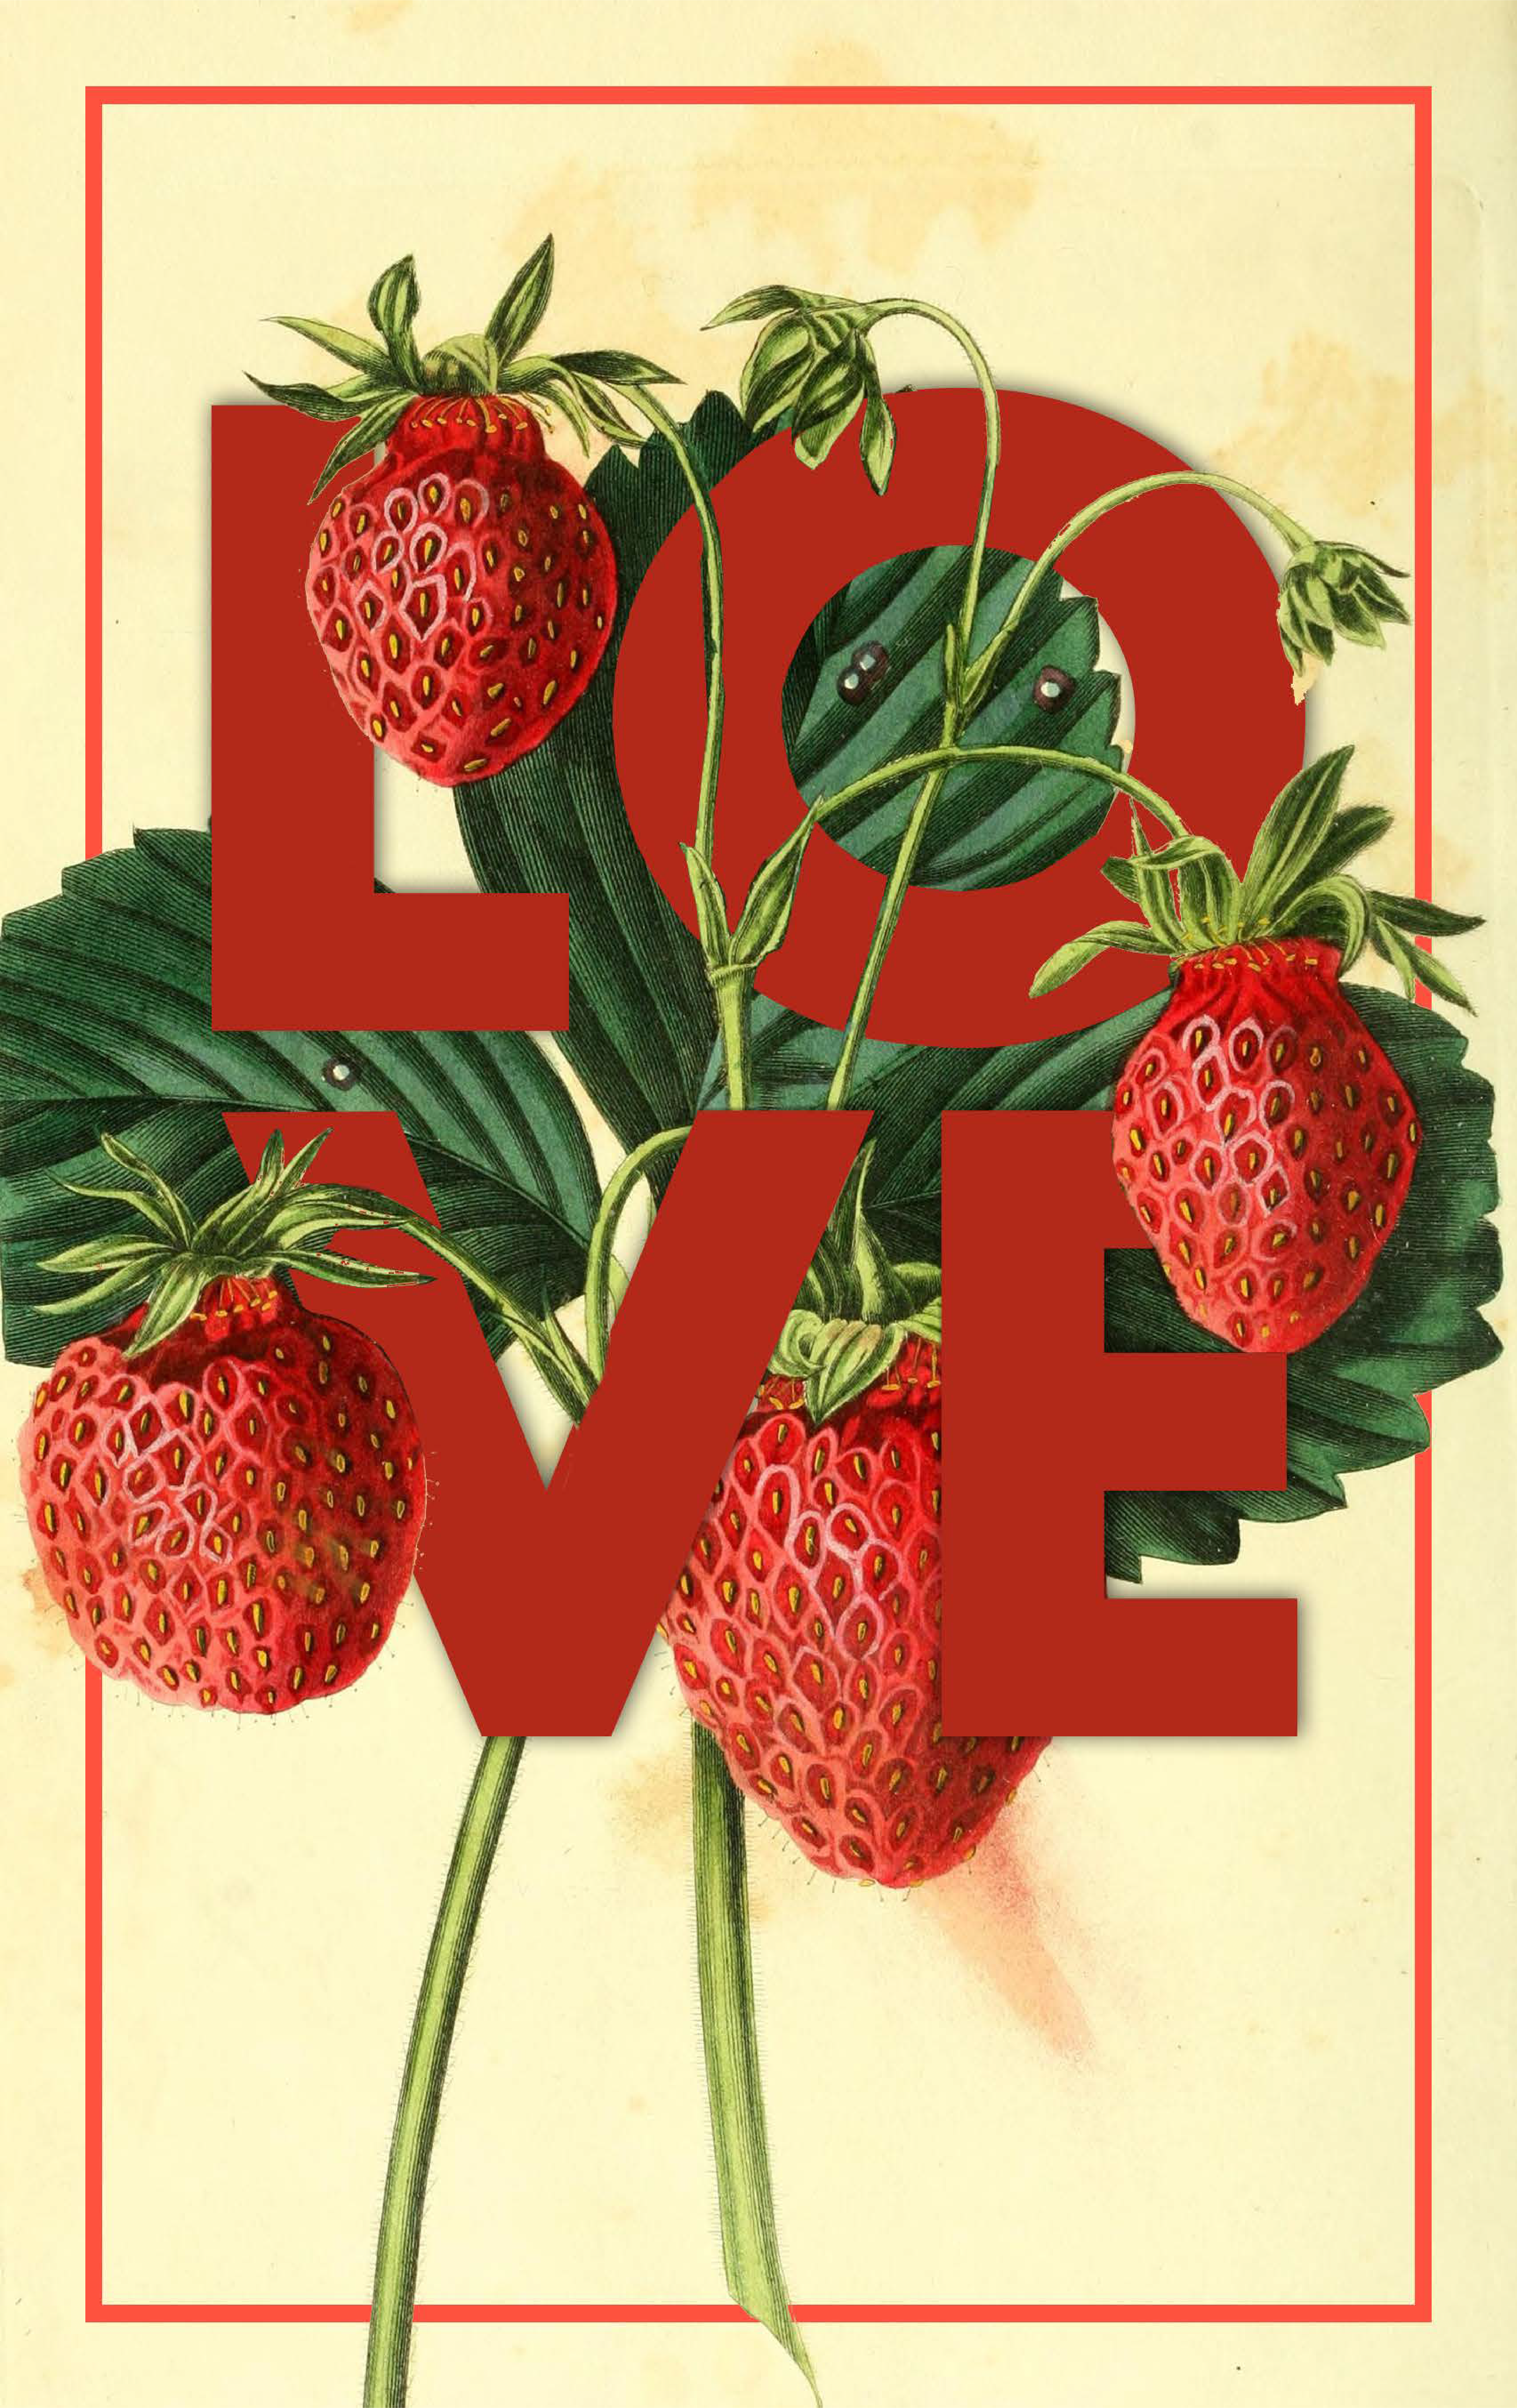 A poster of strawberries paired with a word they symbolize, love. Image links to full-size image.